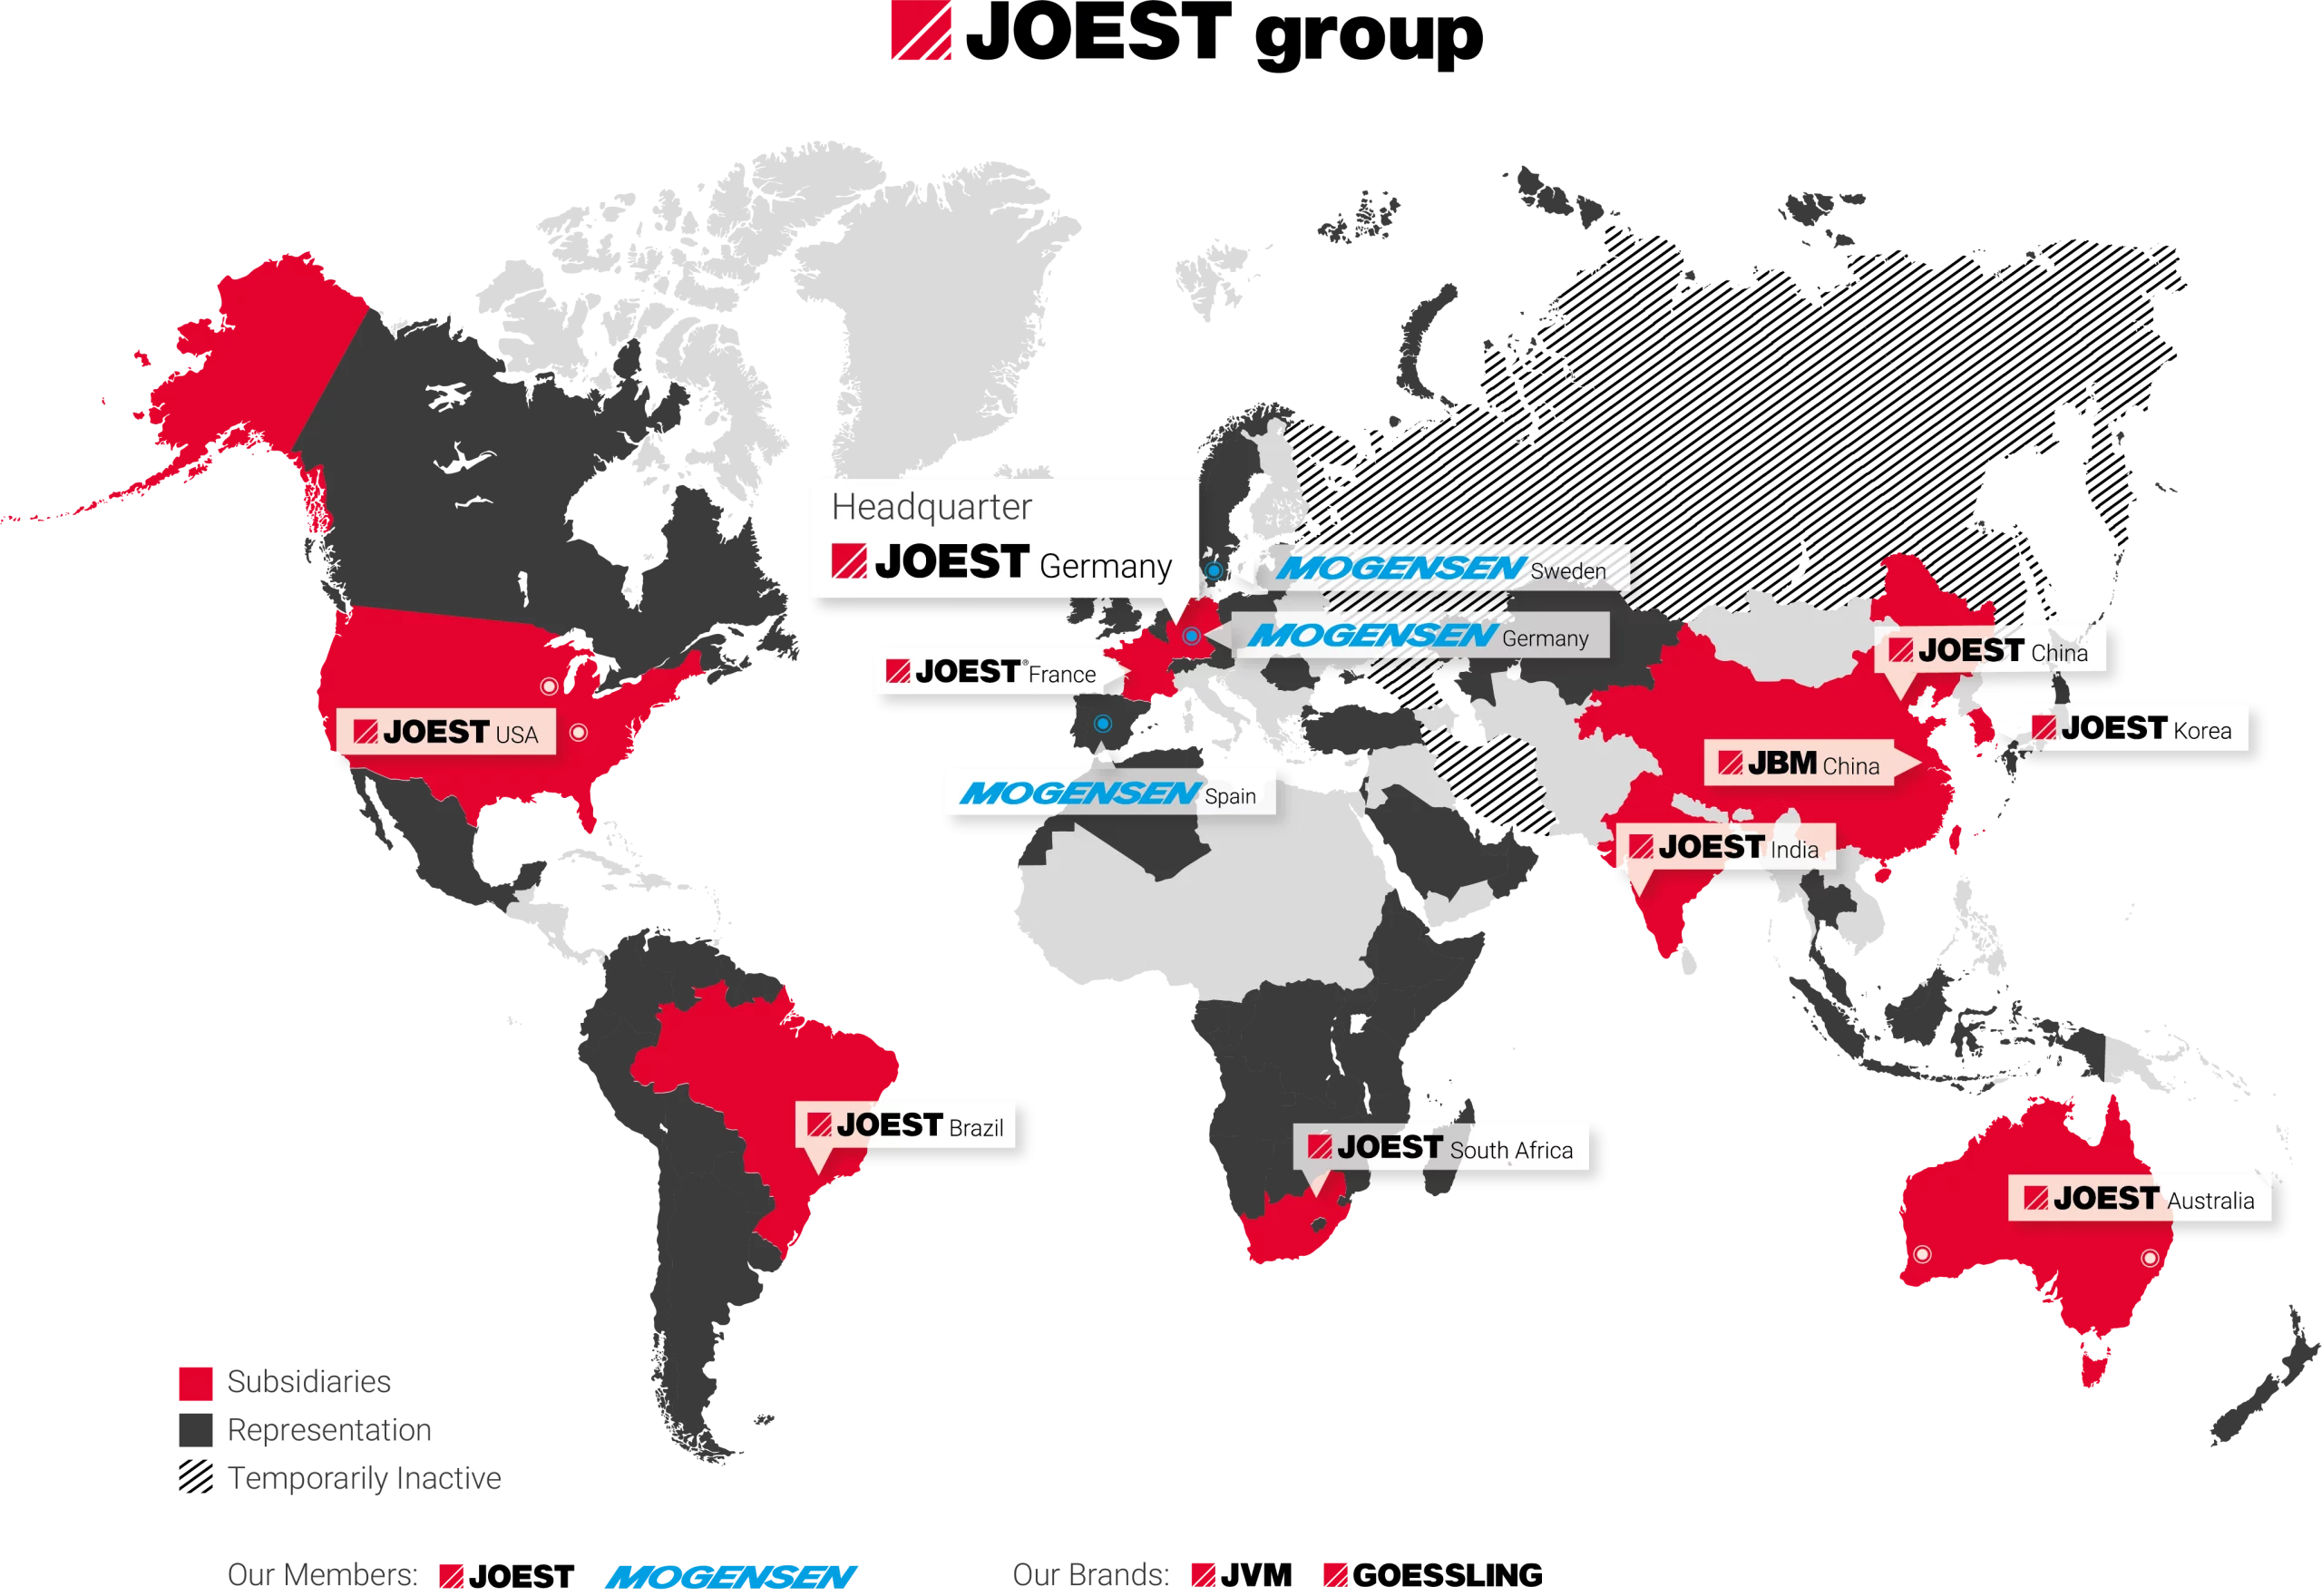 The world map with the numerous locations of the JOEST group subsidiaries.